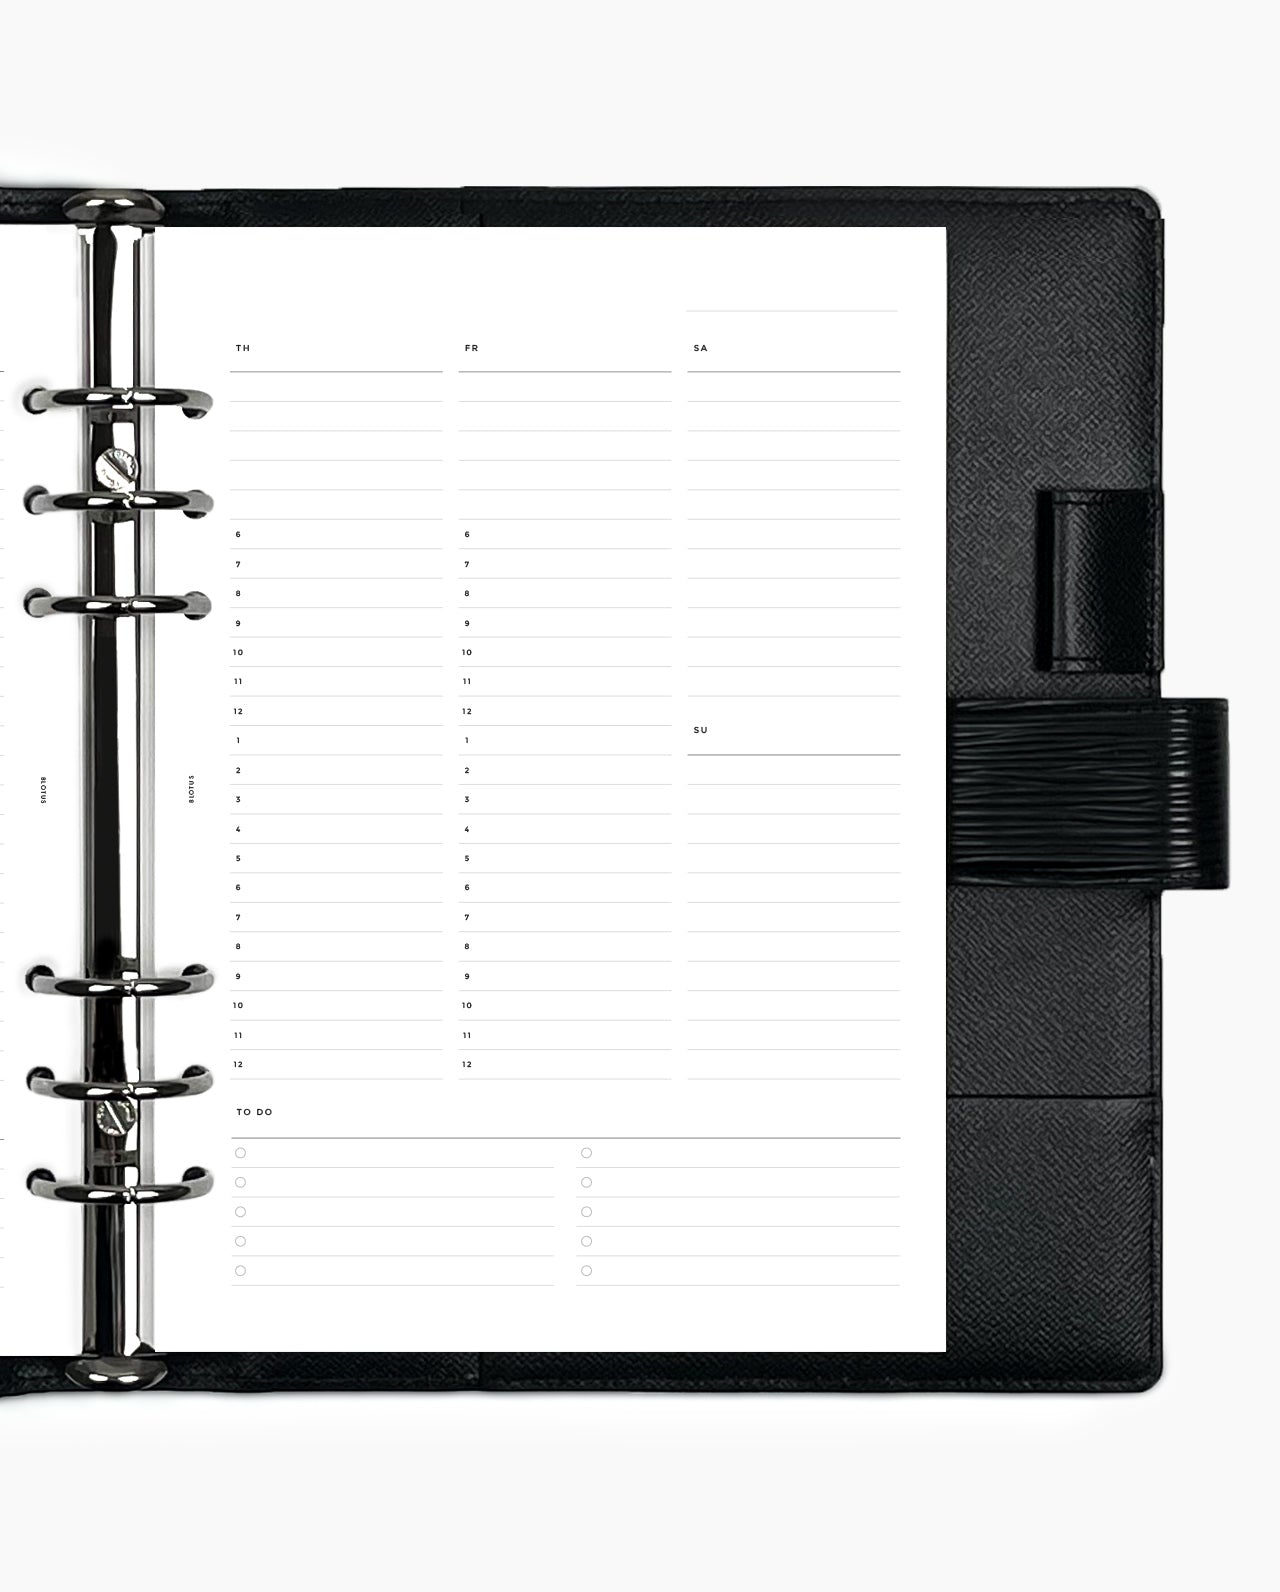 Undated Weekly Agenda Inserts for Small / Pm Sized Planner 